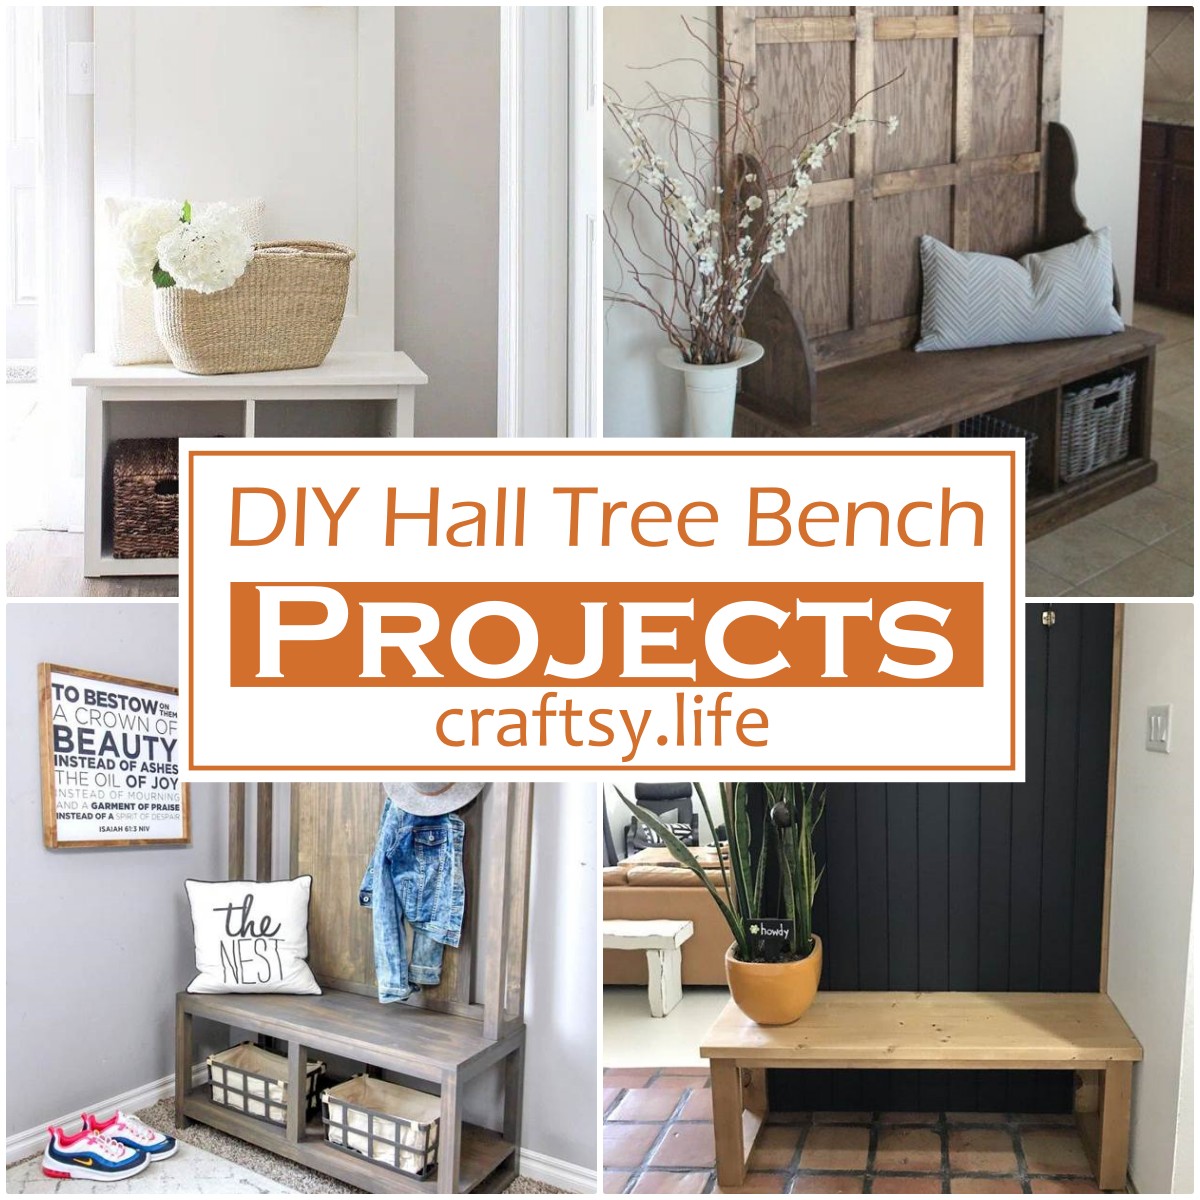 DIY Hall Tree Bench Projects 1